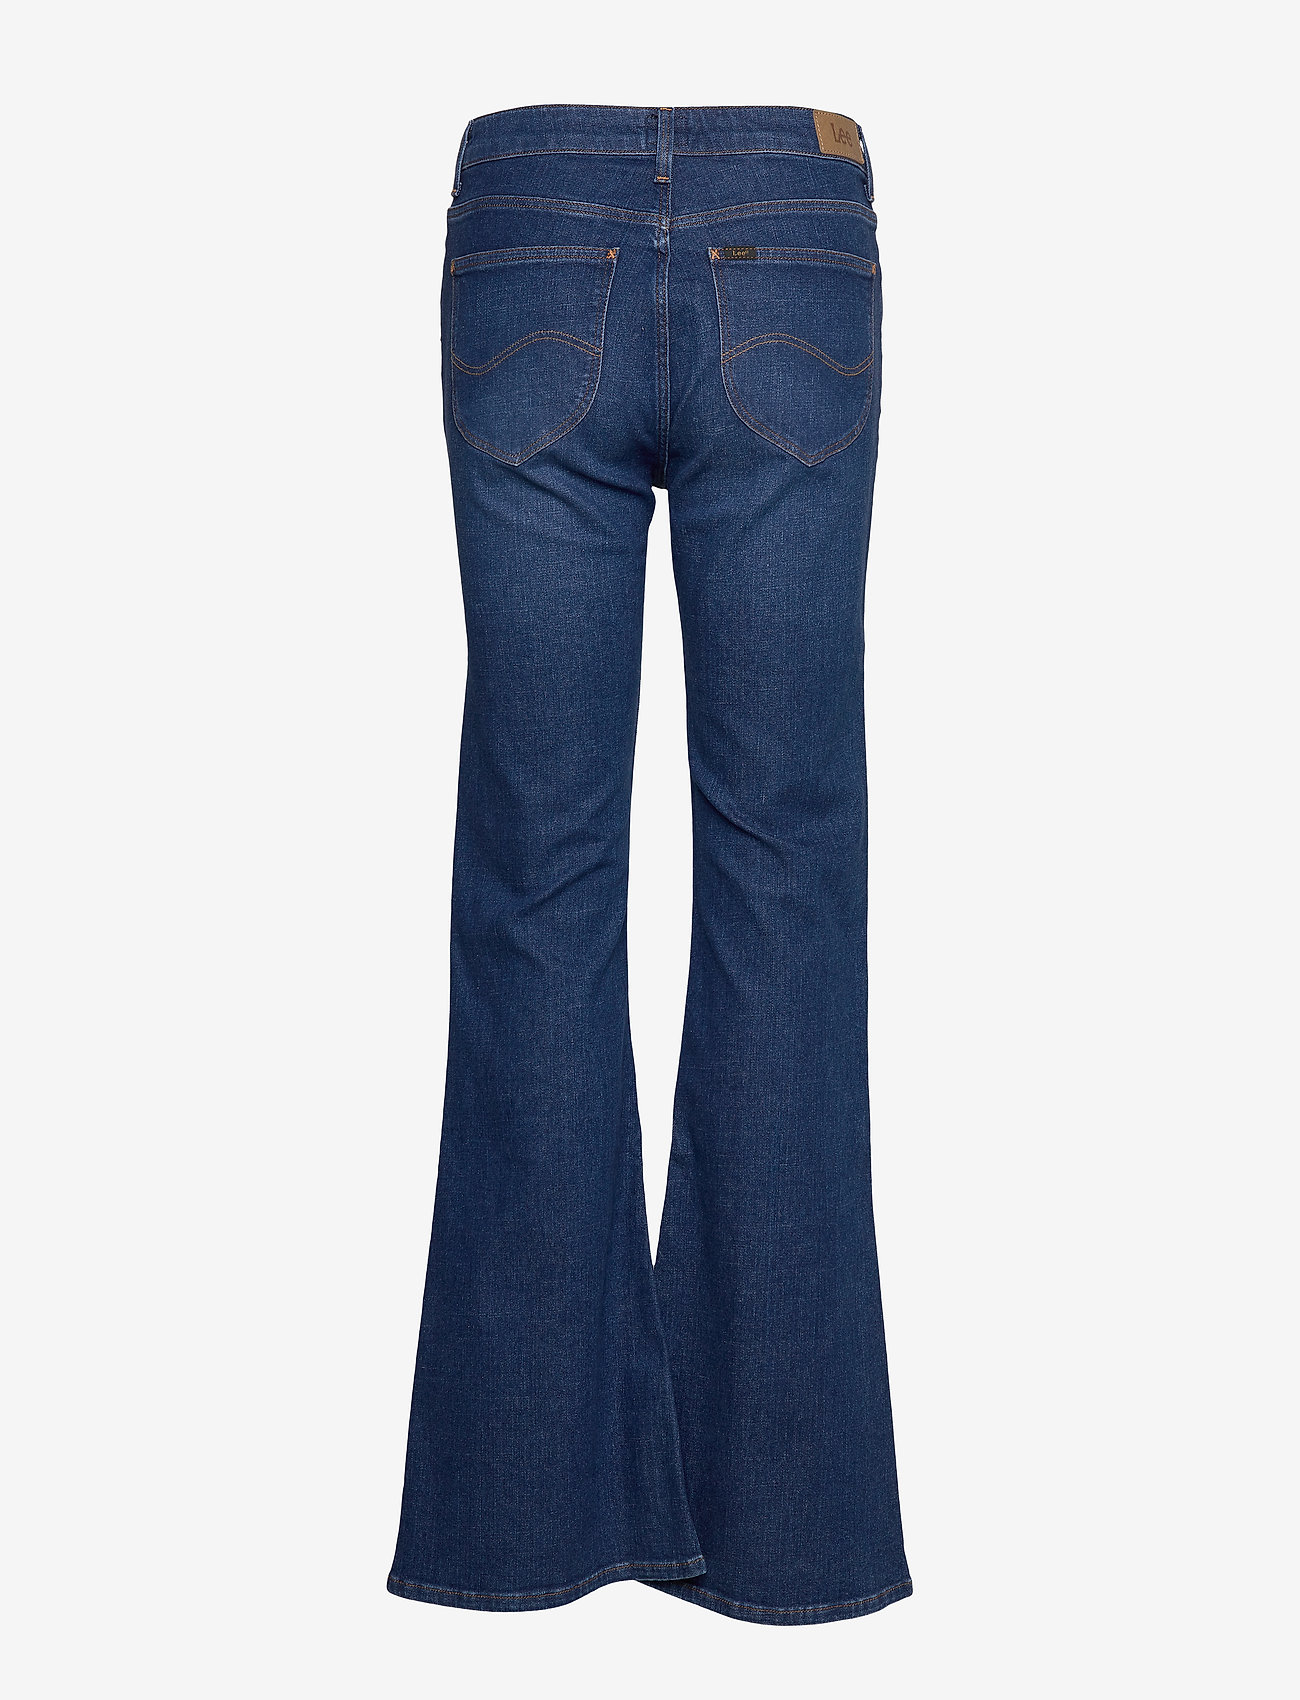 Lee Jeans - BREESE - flared jeans - dark favourite - 1